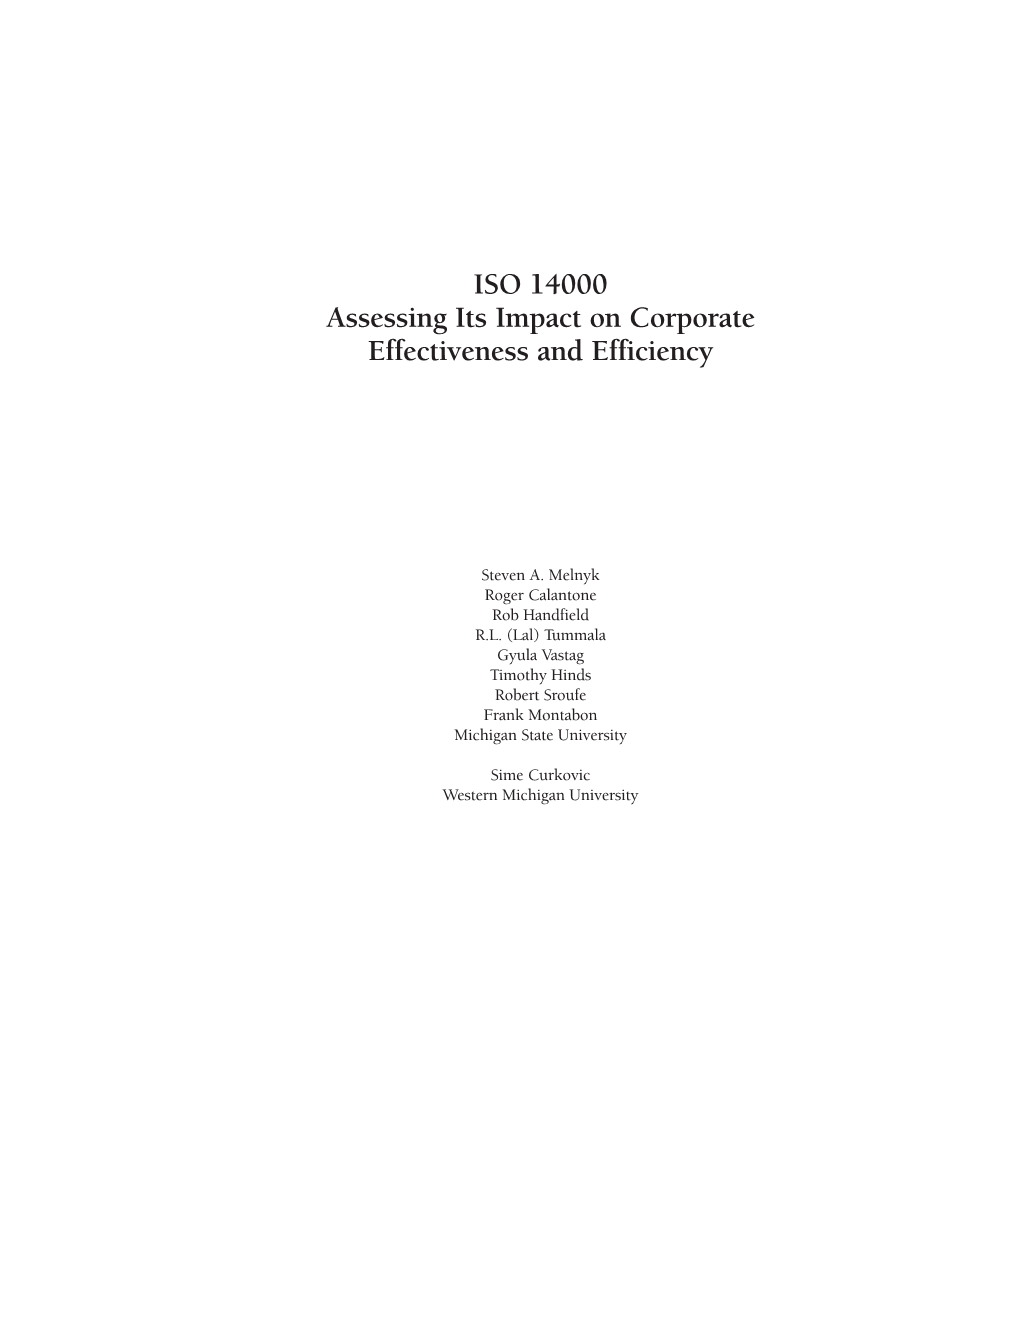 ISO 14000 Assessing Its Impact on Corporate Effectiveness and Efficiency